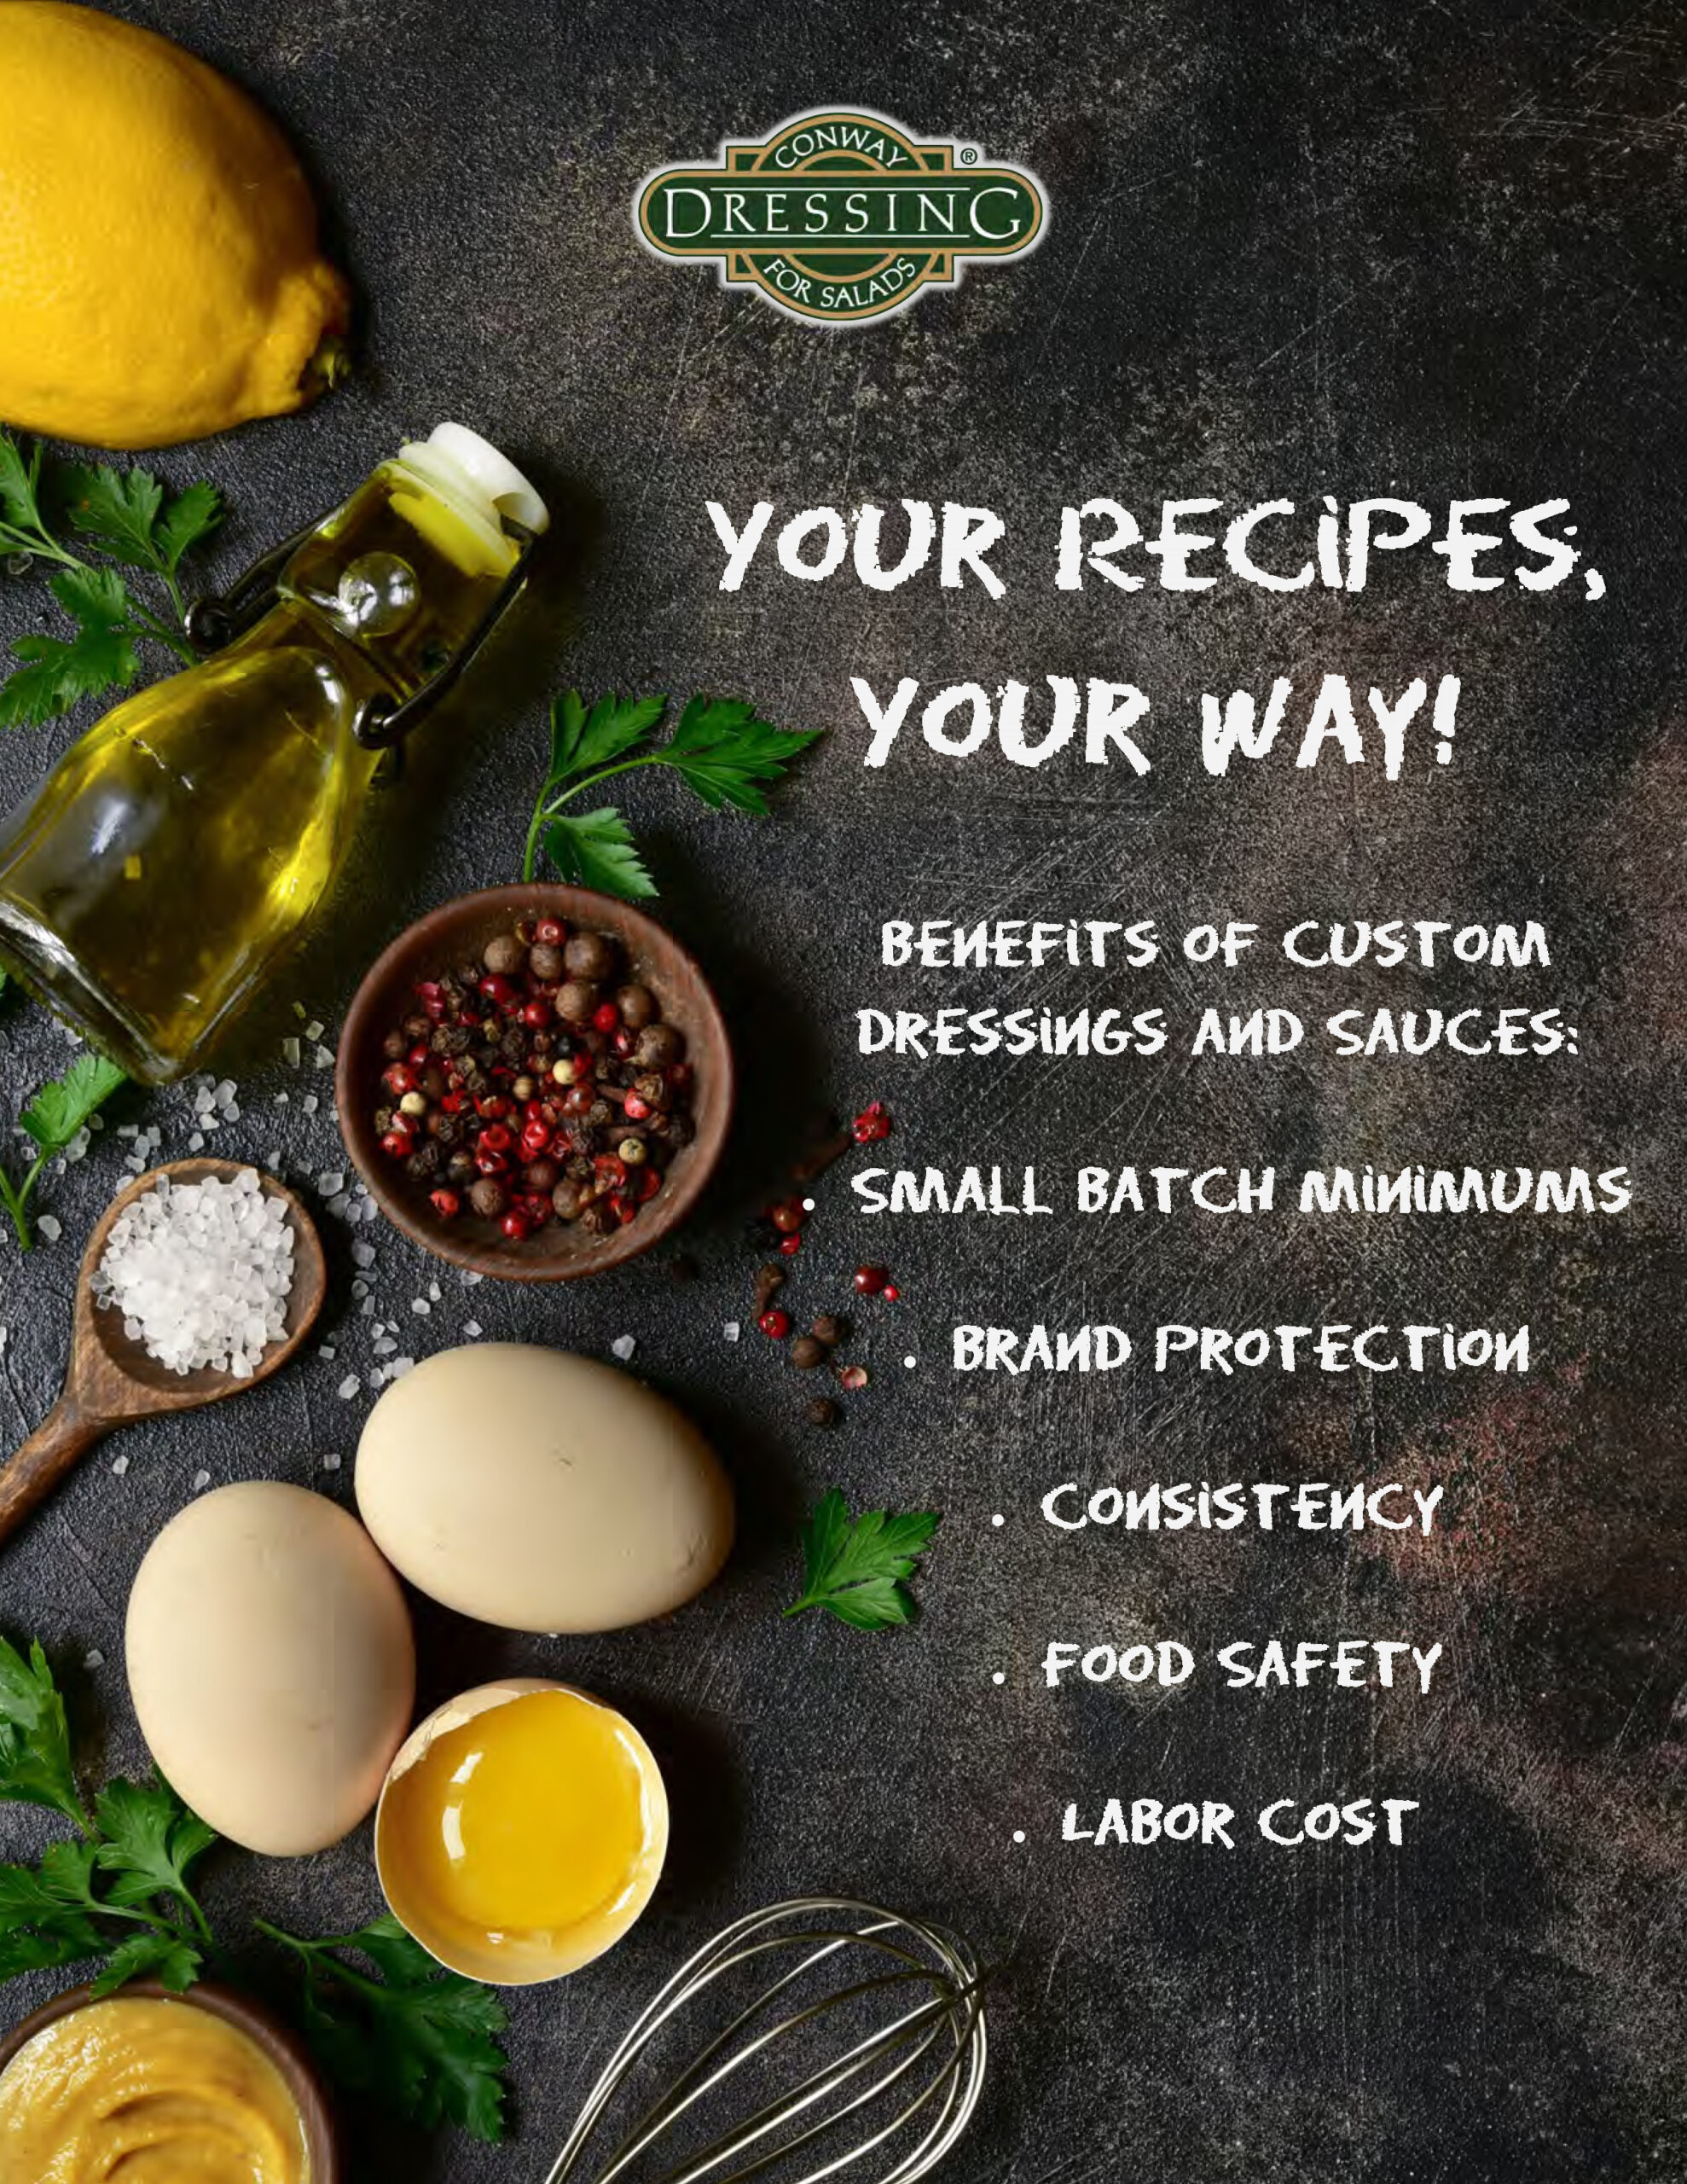 Custom salad dressings and sauces for restaurants